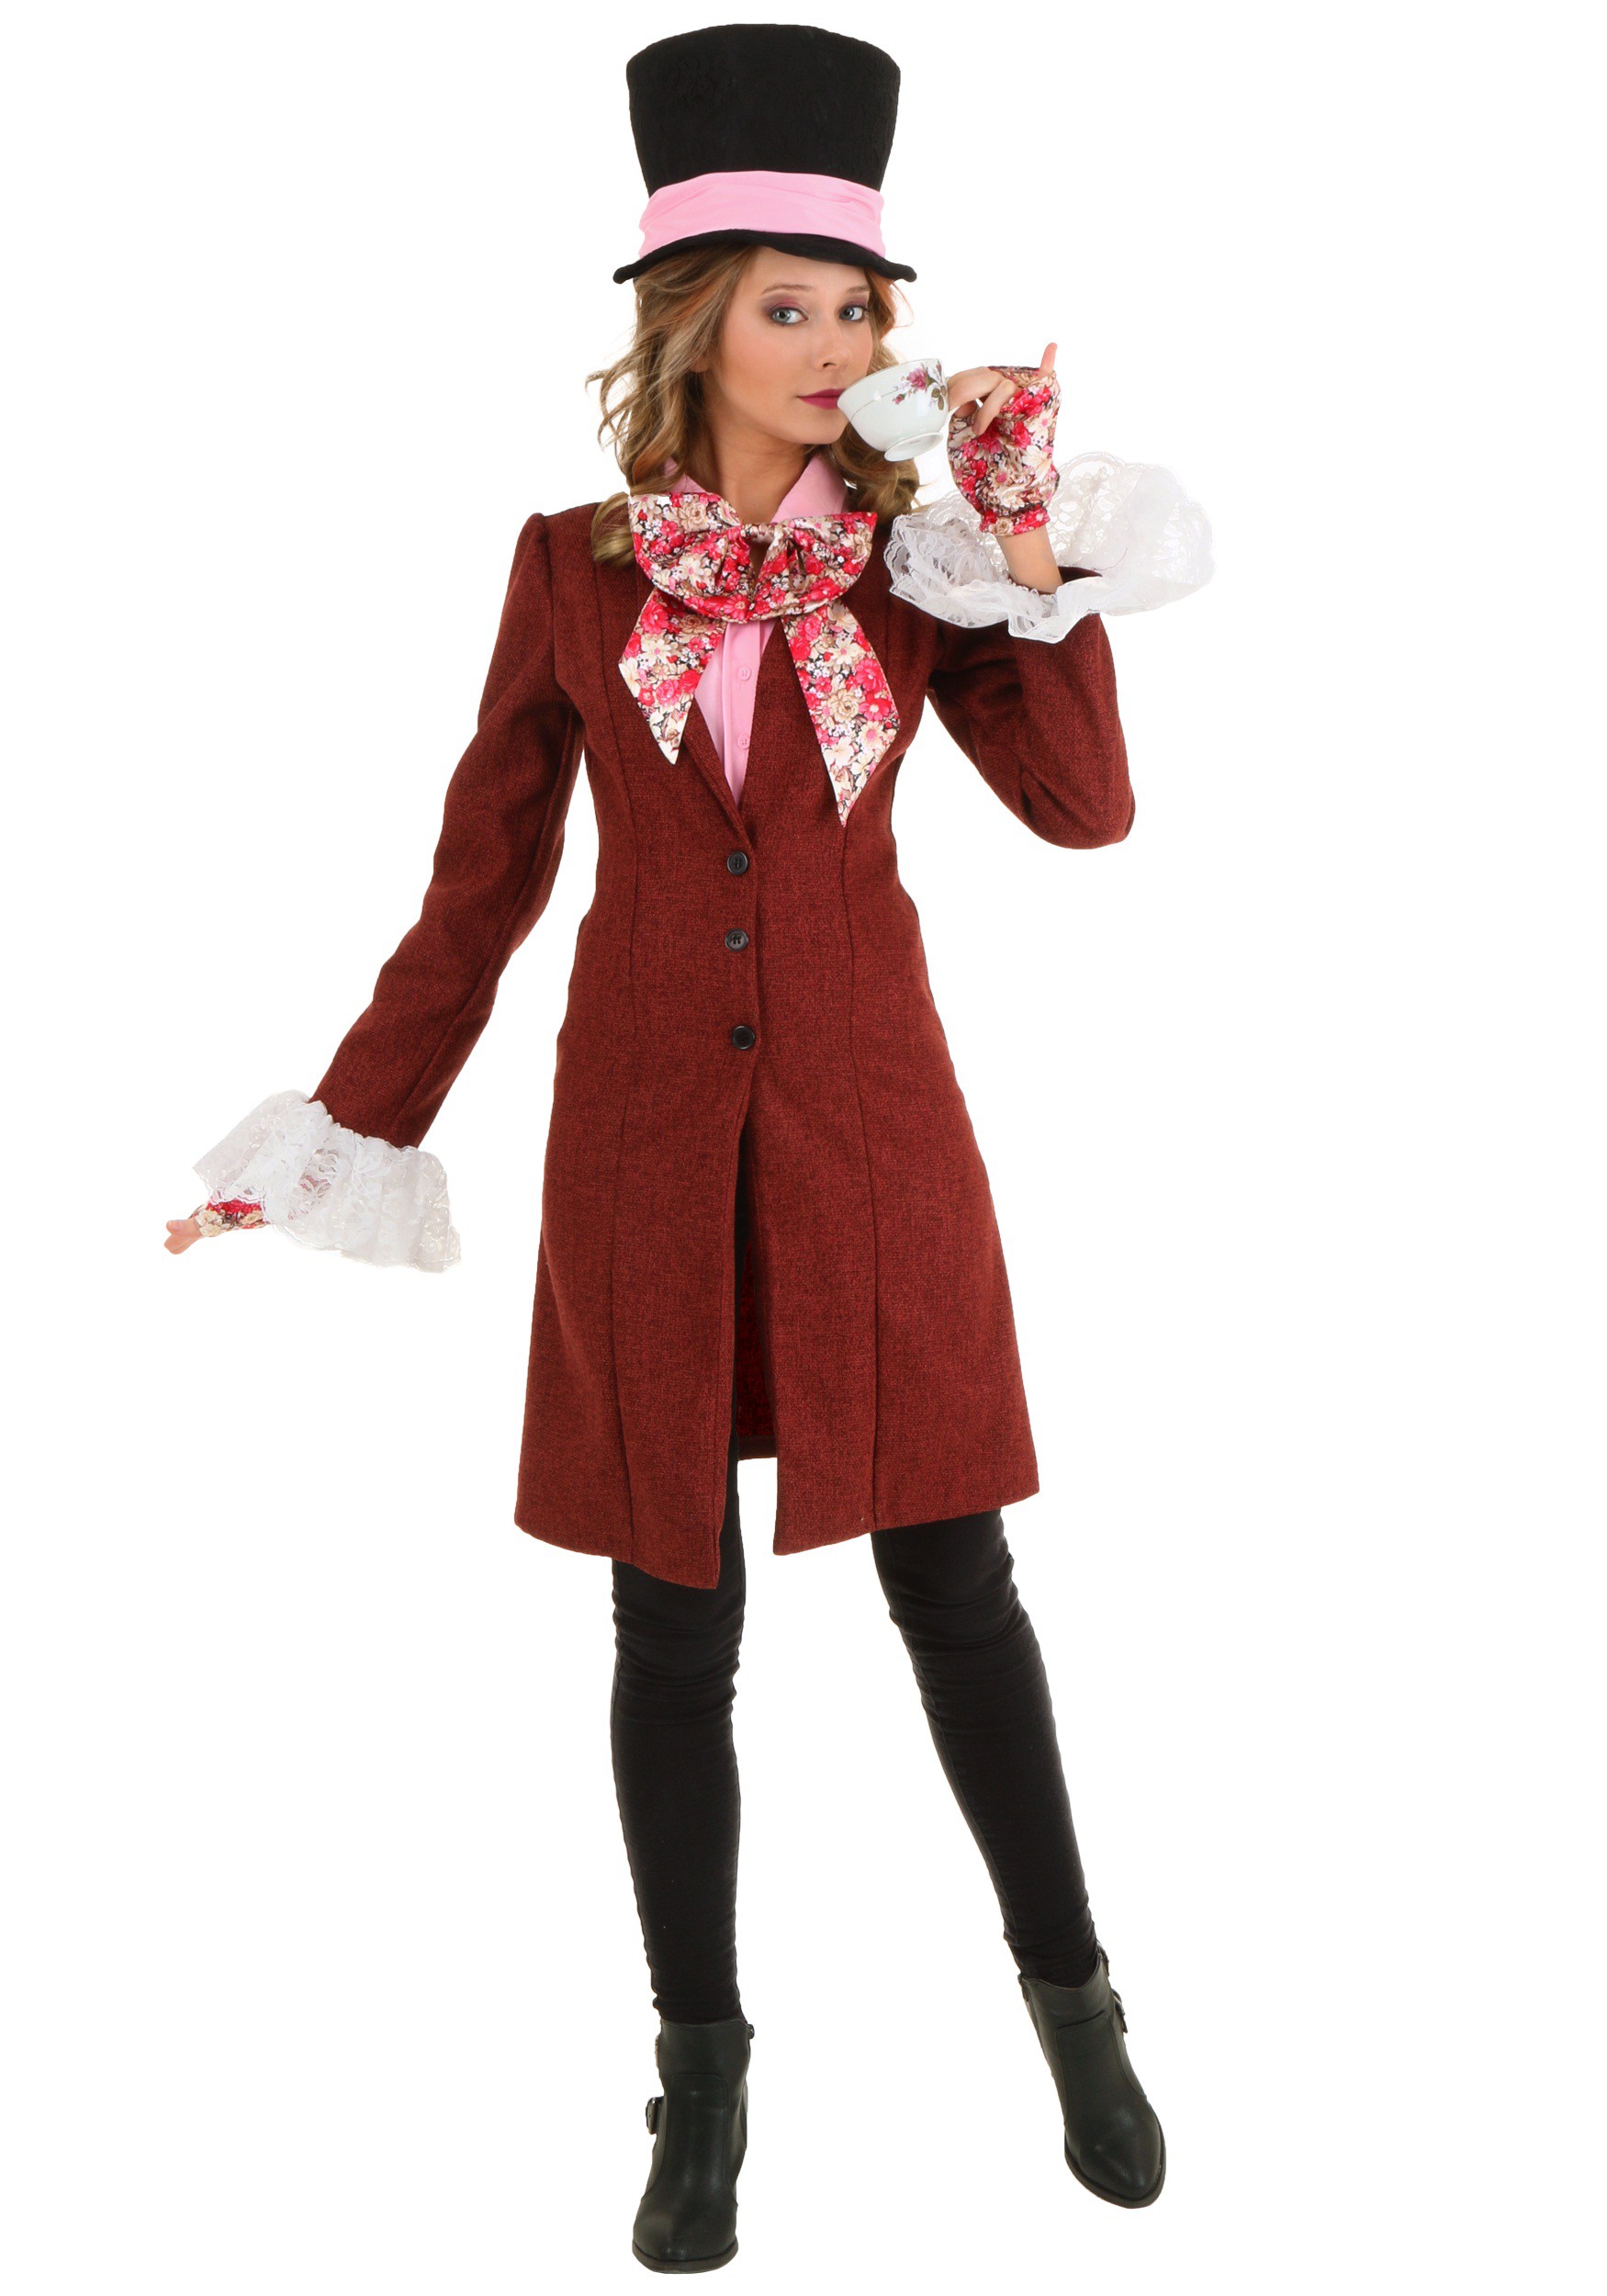 Image of FUN Costumes Deluxe Mad Hatter Plus Size Costume for Women